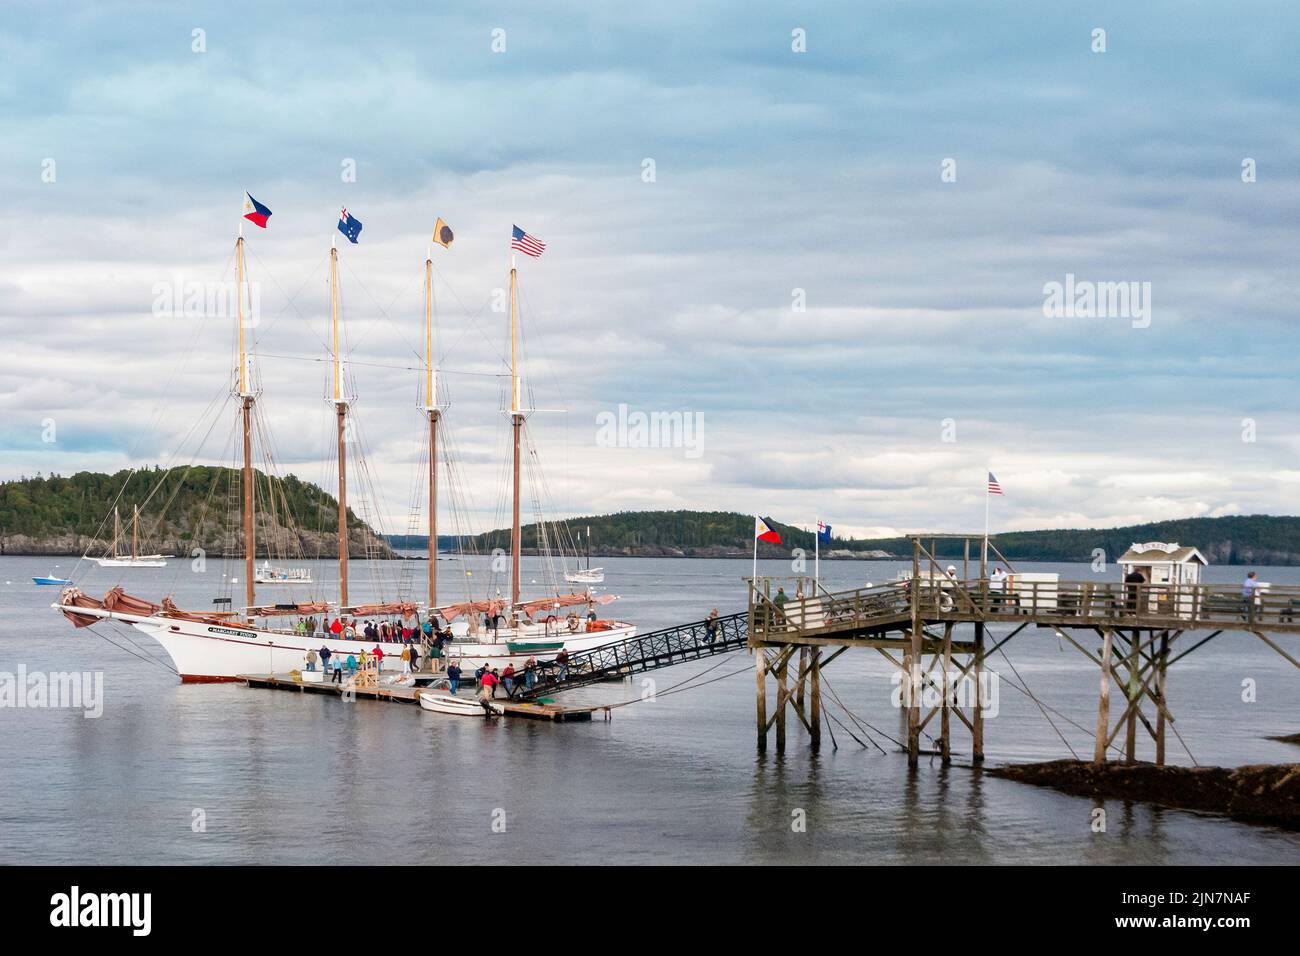 Four masted schooner built as a tourist vessel, launched 04-11-1998 sailing out of Bar Harbor, Maine, USA. Schooner loaded with tourists. Stock Photo